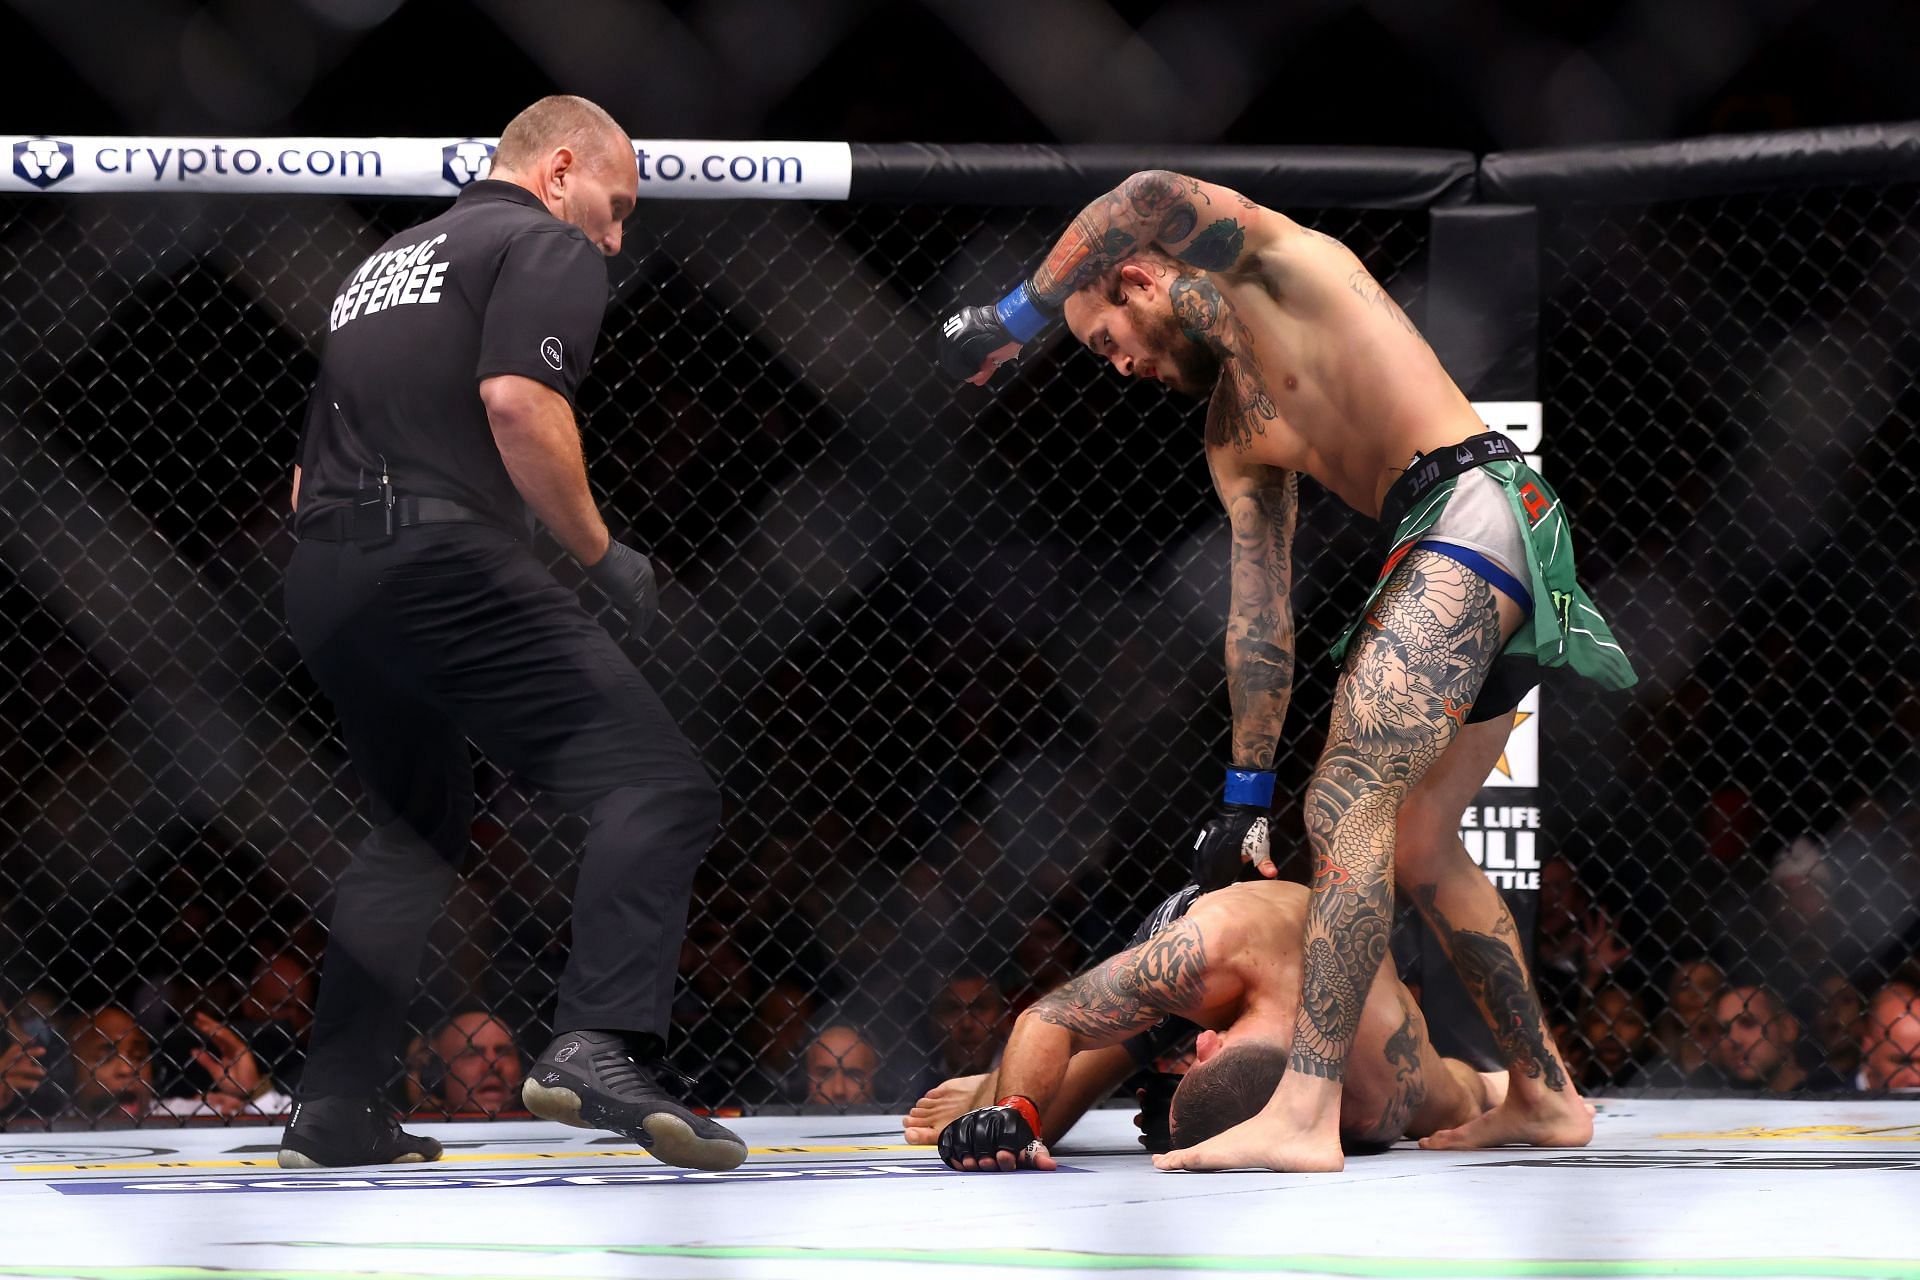 Marlon Vera pulled off the best finish of his UFC career against Frankie Edgar